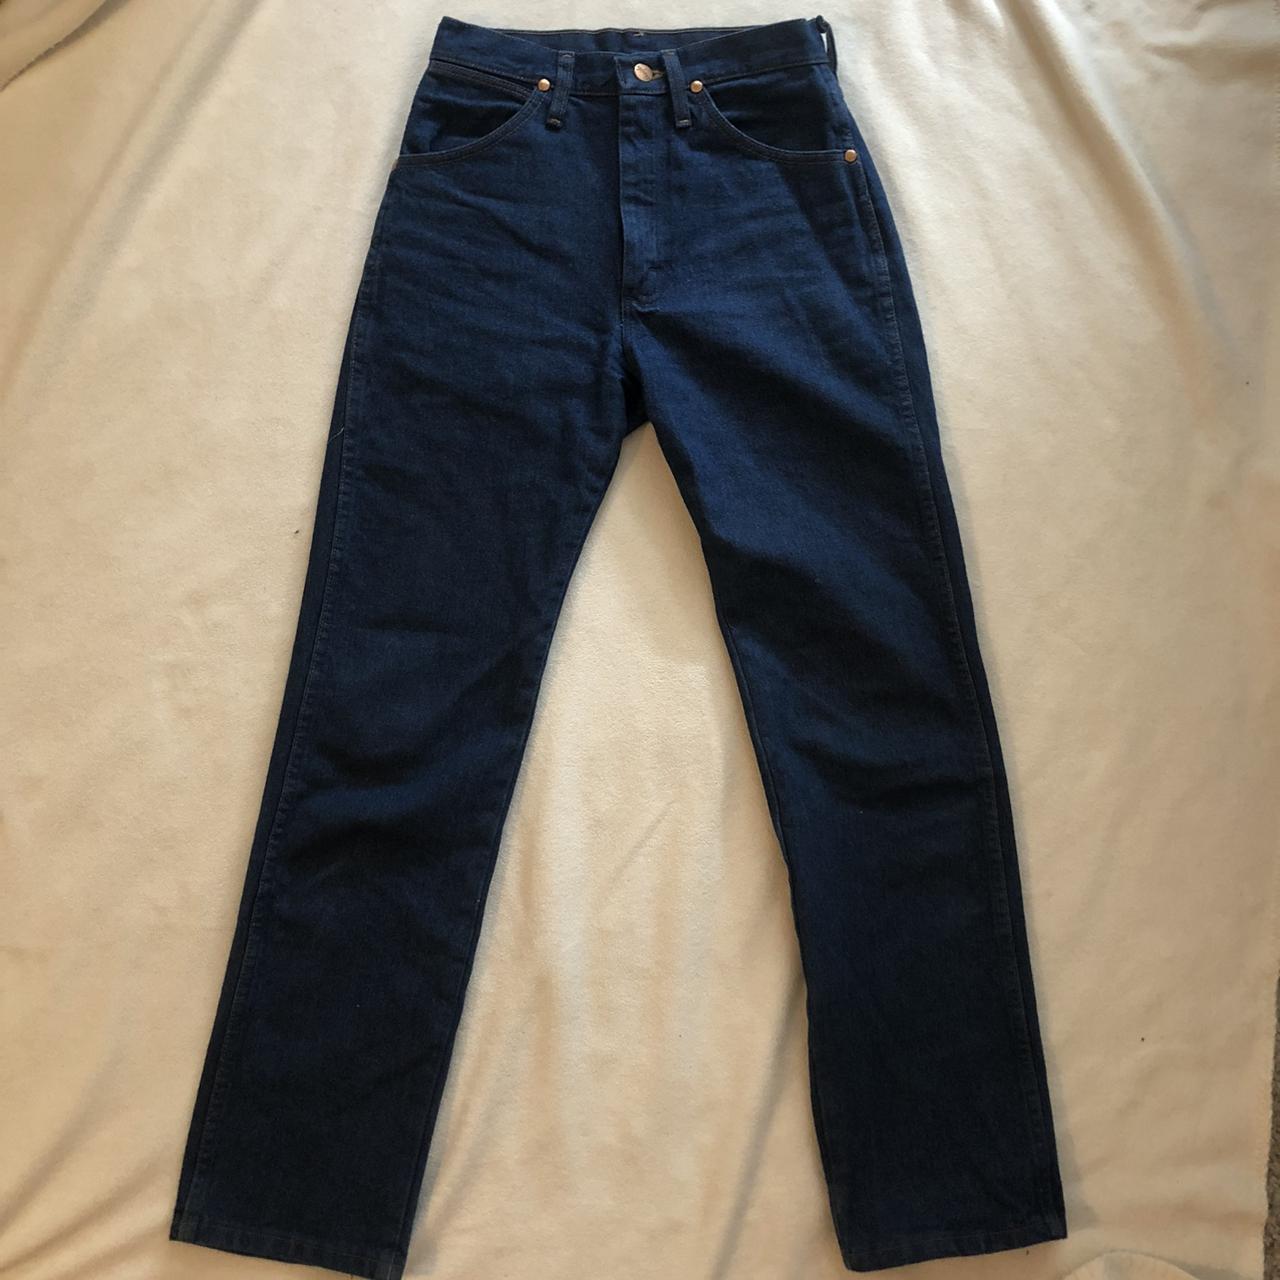 Perfect wrangler high waisted blue jeans 😍excellent... - Depop